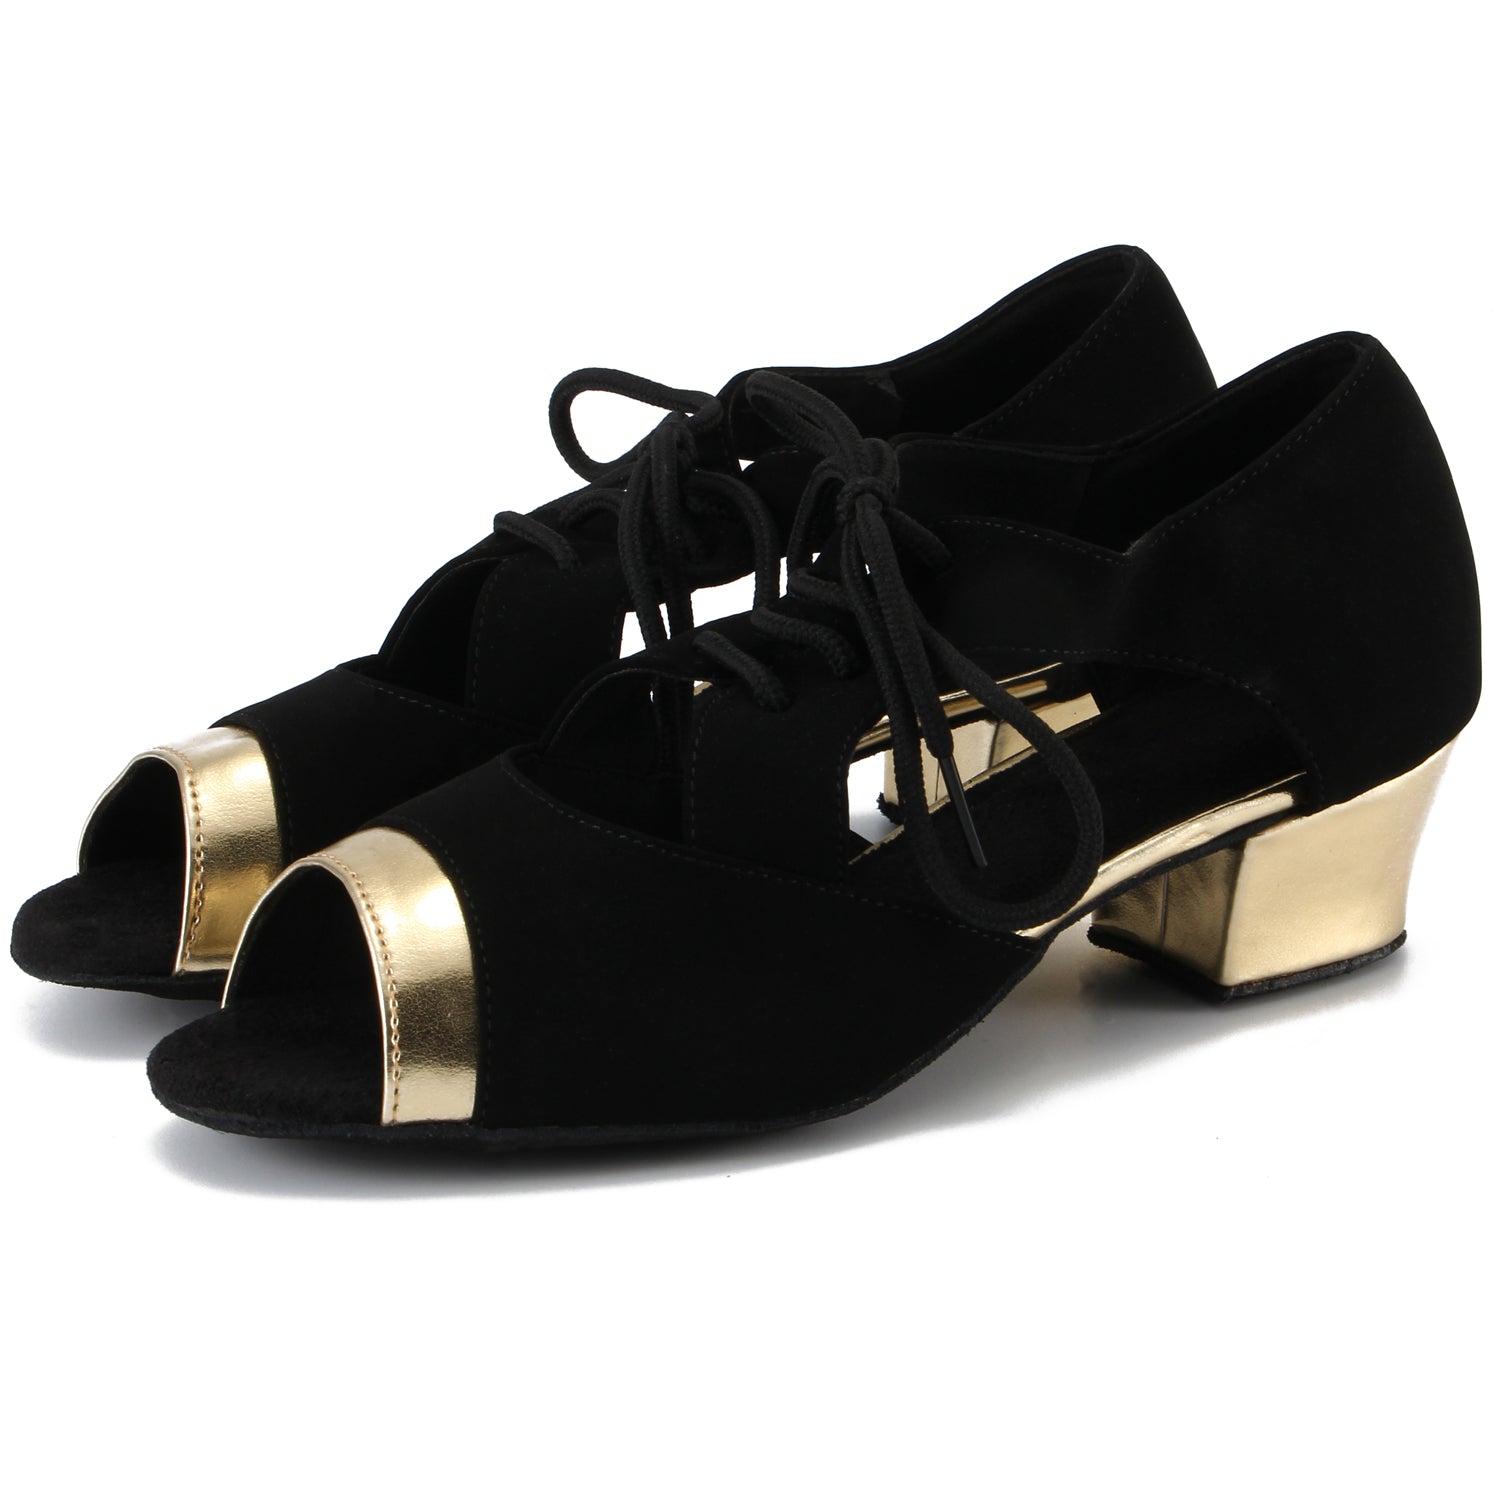 Women Ballroom Dancing Shoes with Suede Sole, Lace-up Open-toe Design in Black and Gold for Tango Latin Practice (PD-3004A)9